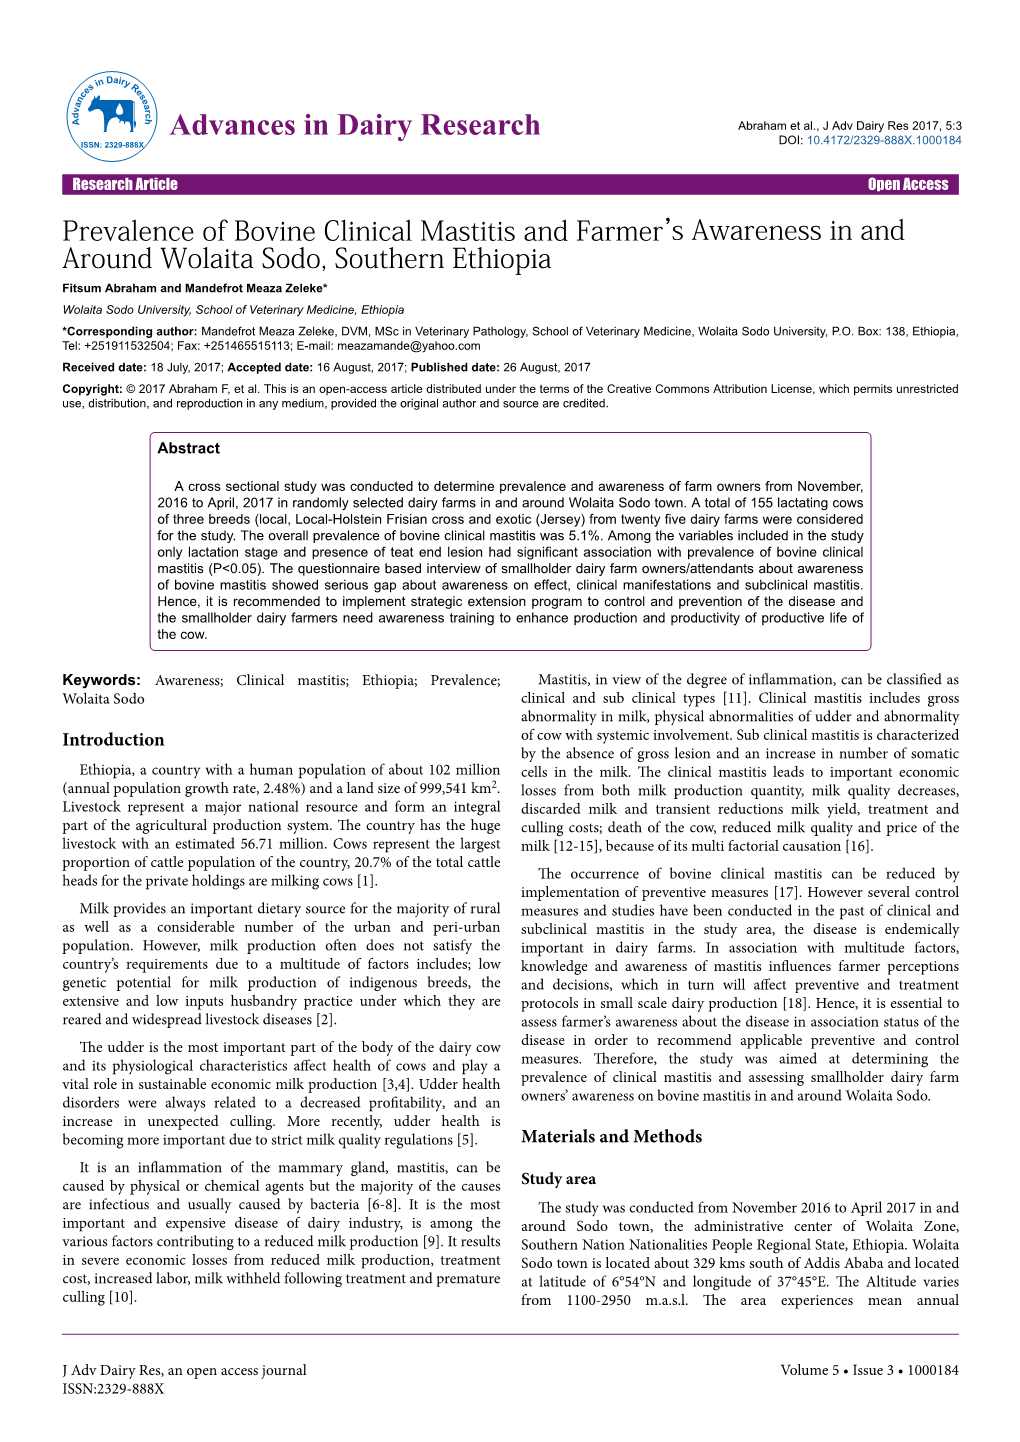 Prevalence of Bovine Clinical Mastitis and Farmer's Awareness in and Around Wolaita Sodo, Southern Ethiopia